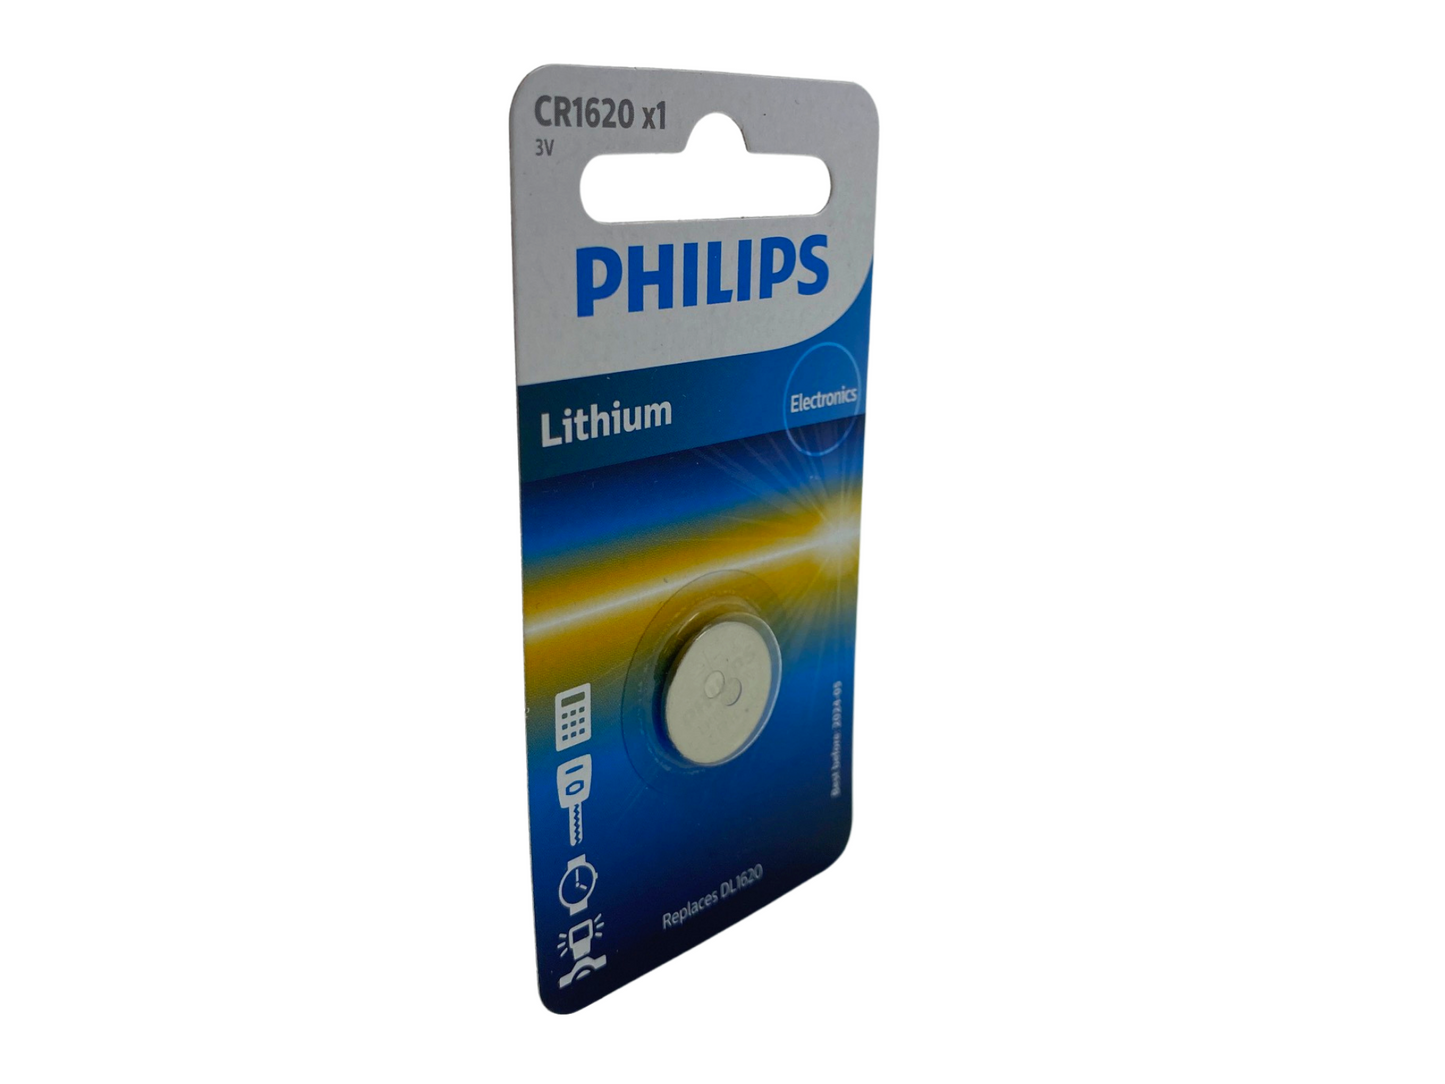 Philips CR1620 Lithium Cell Battery